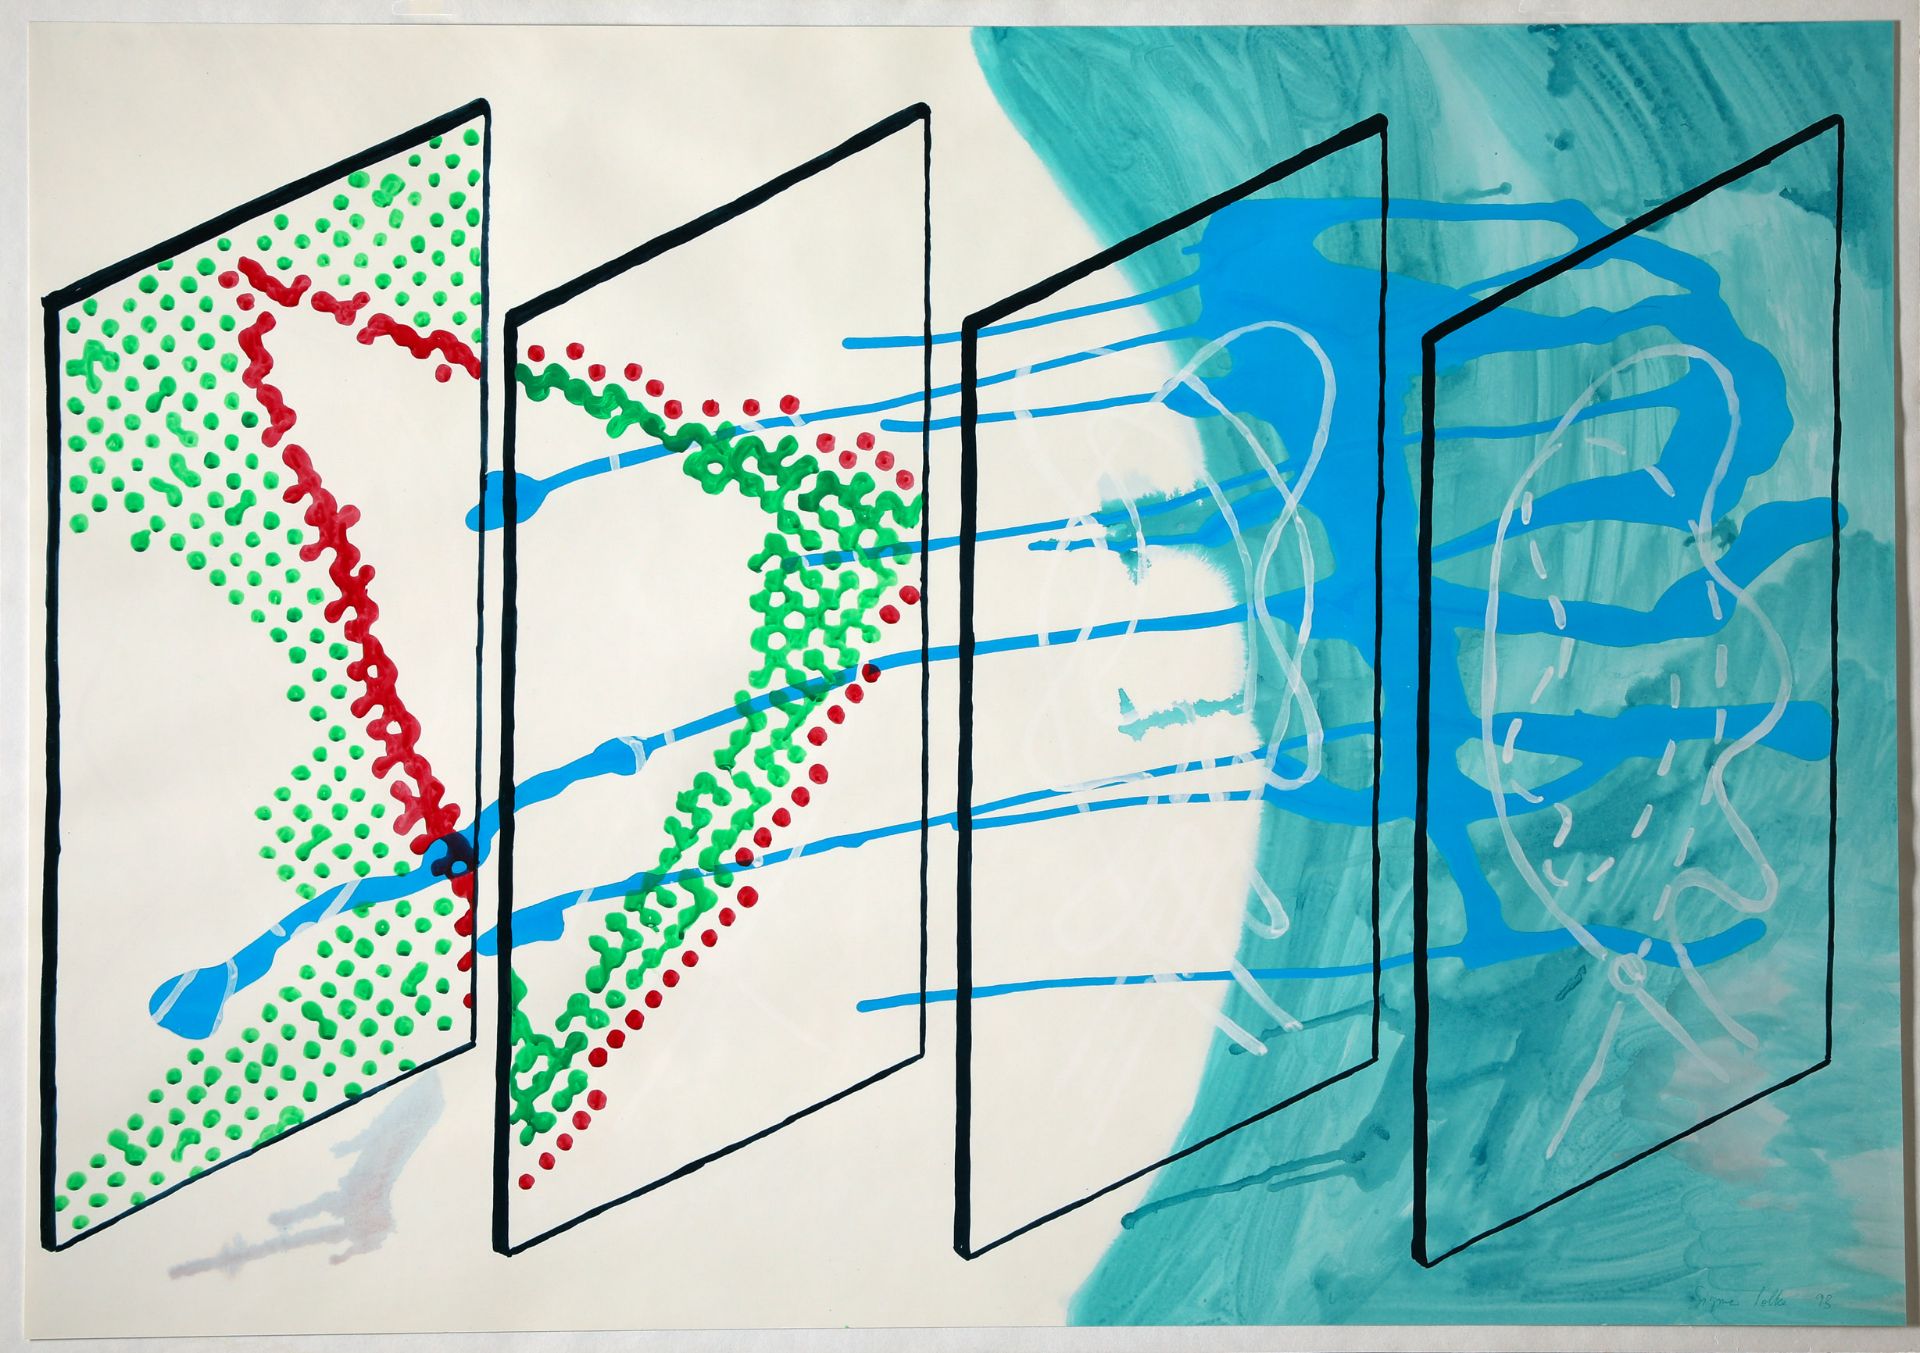 Sigmar Polke*, Unique, 1993, overpainting on Offset/ Mönchengladbach 1992, signed - Image 2 of 6